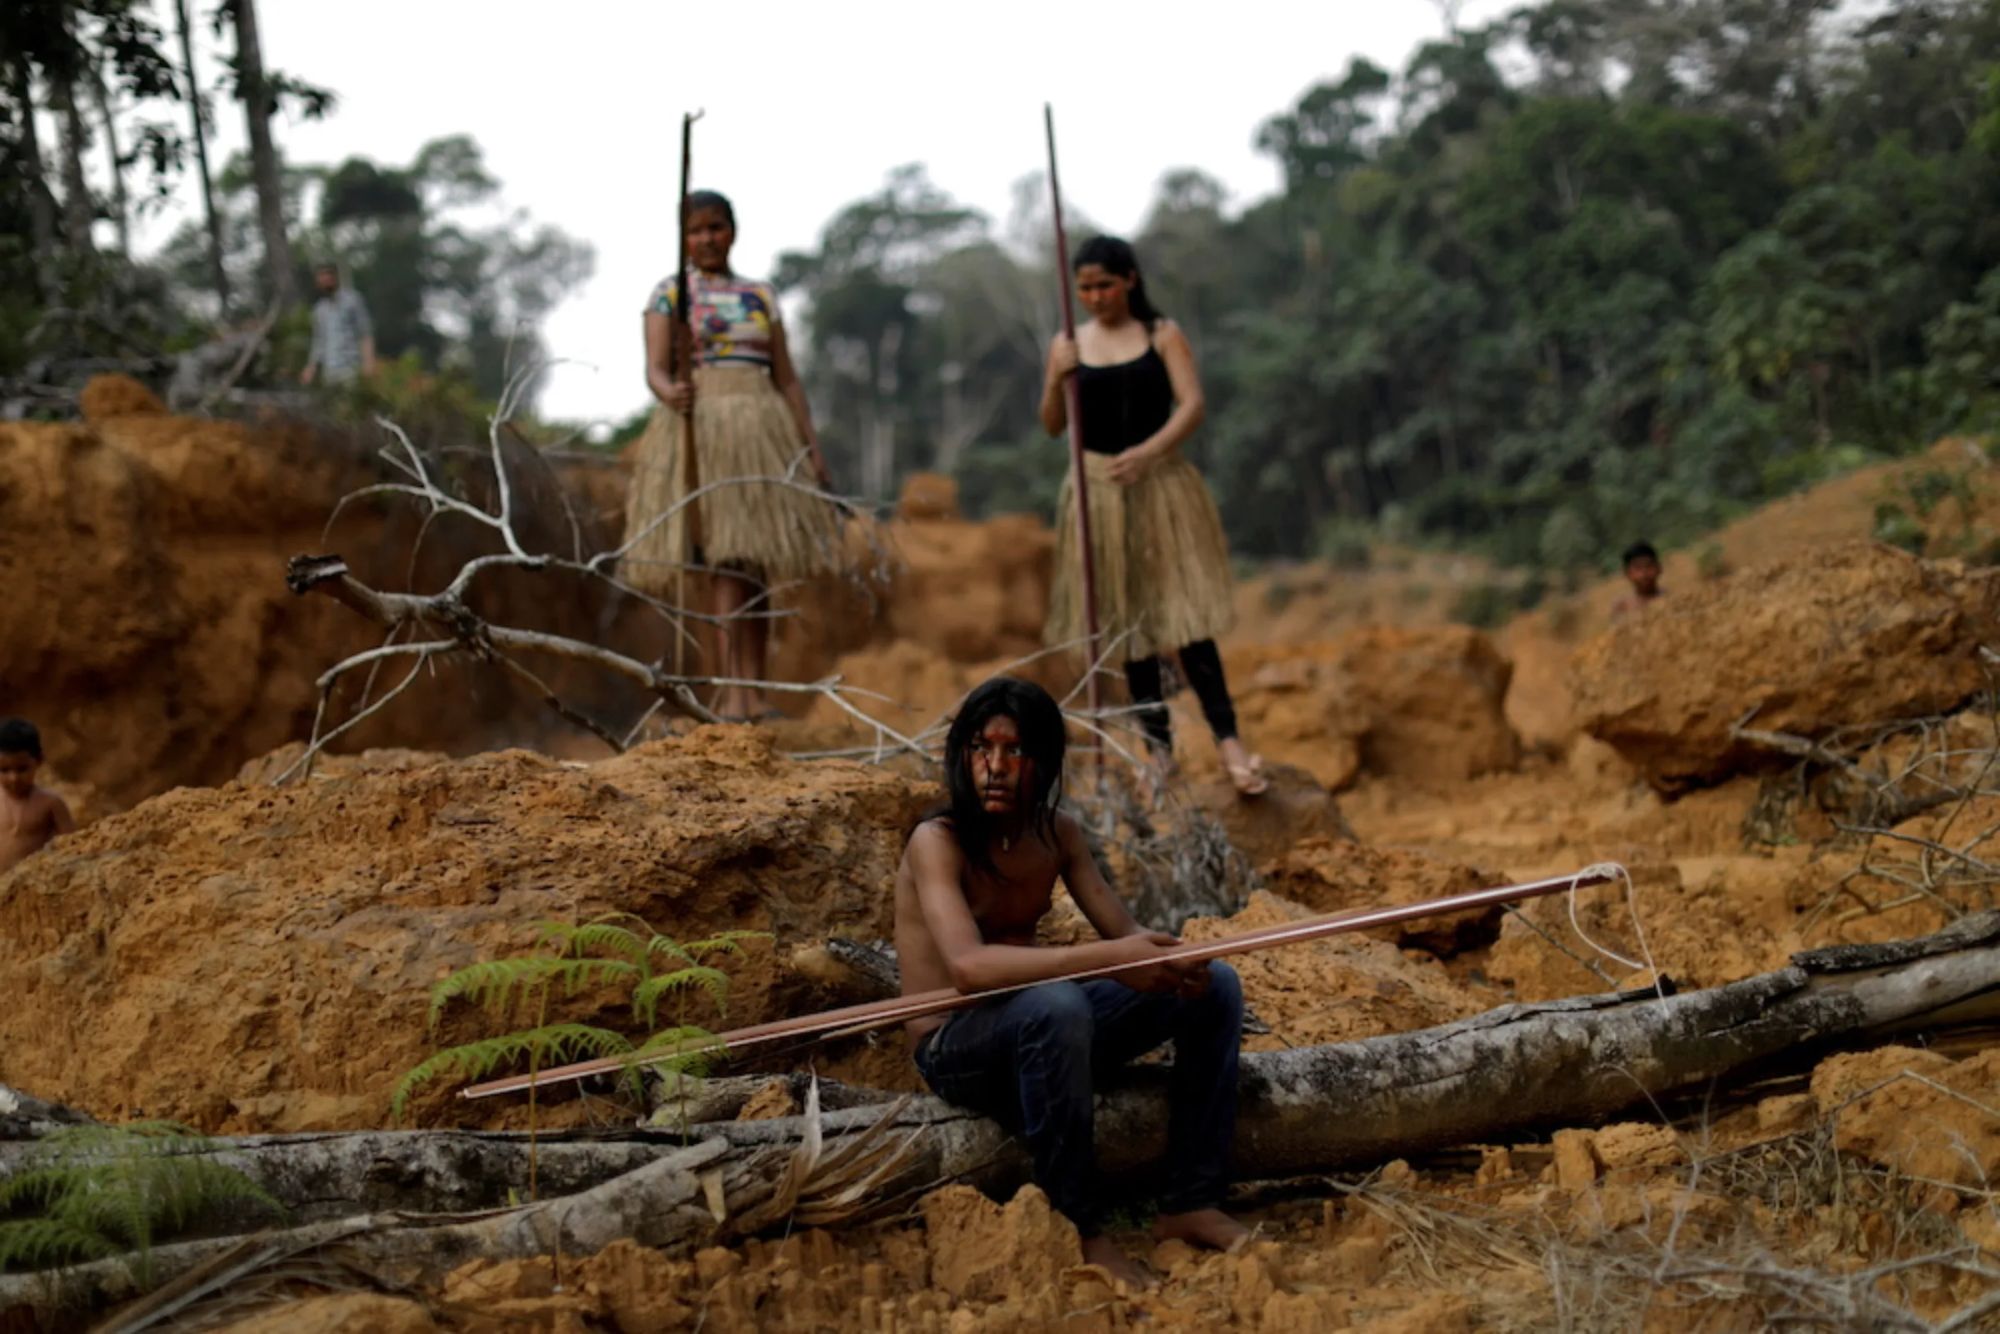 Indigenous people show a deforested area inside the Amazon rainforest REUTERS/Ueslei Marcelino